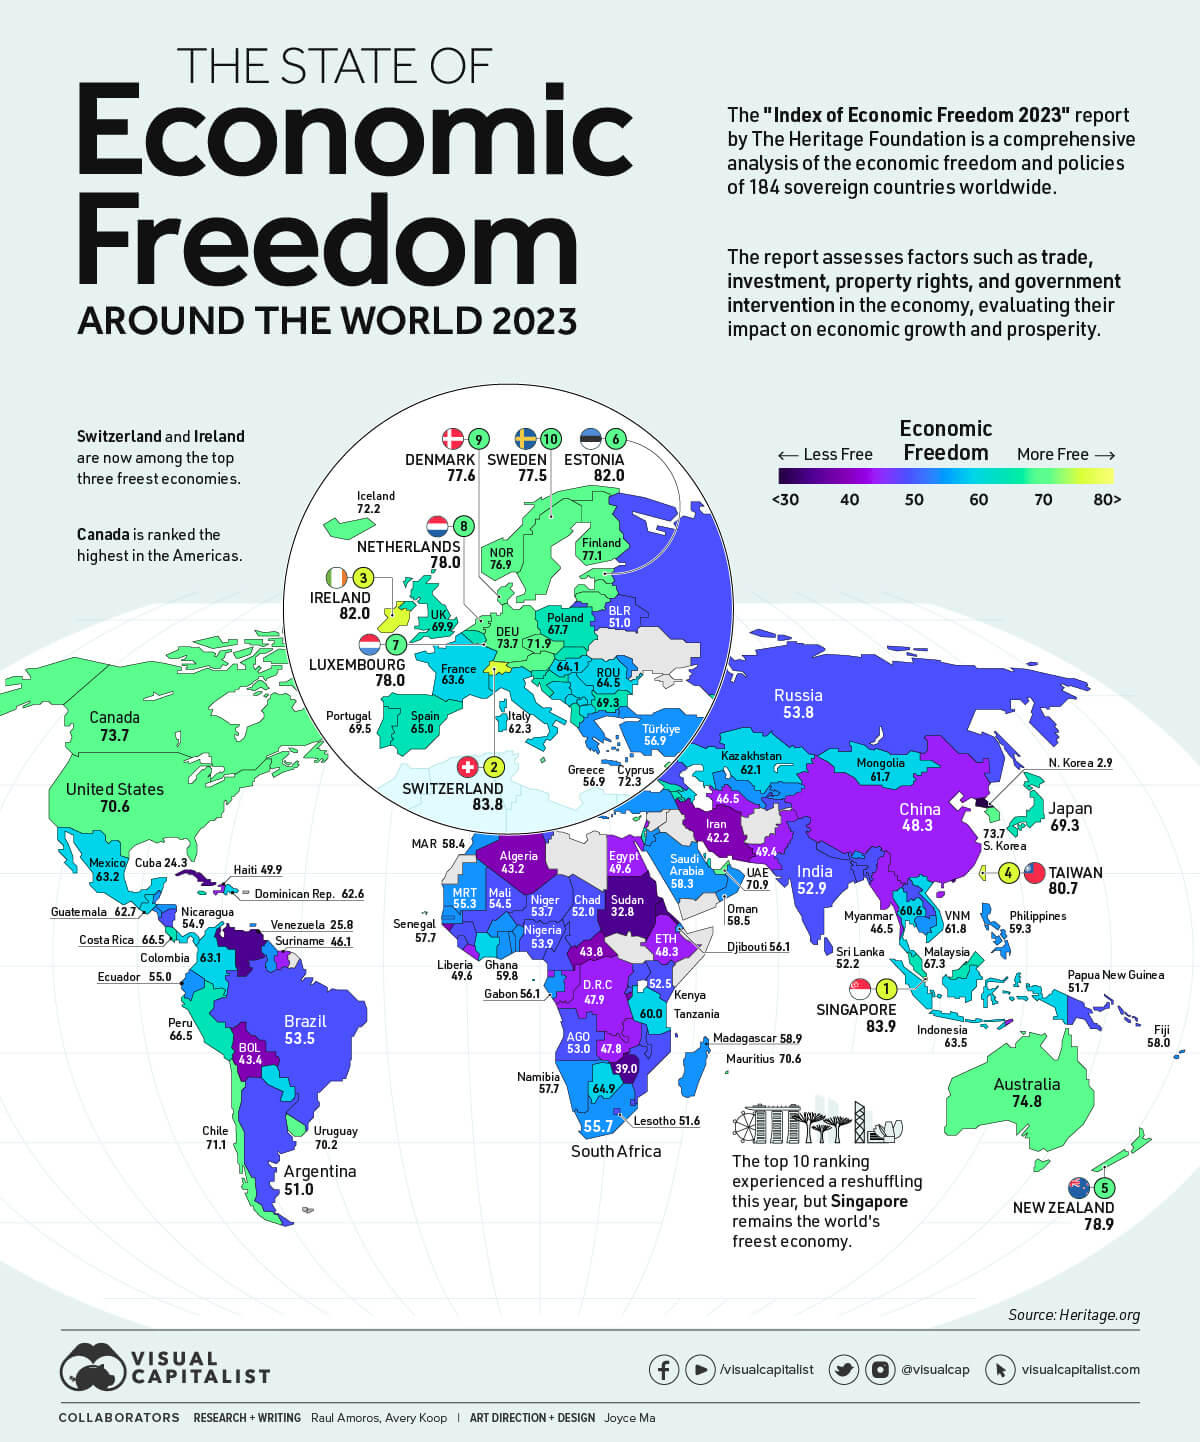 Dar tops EAC states in new economic freedom index for 2023 The